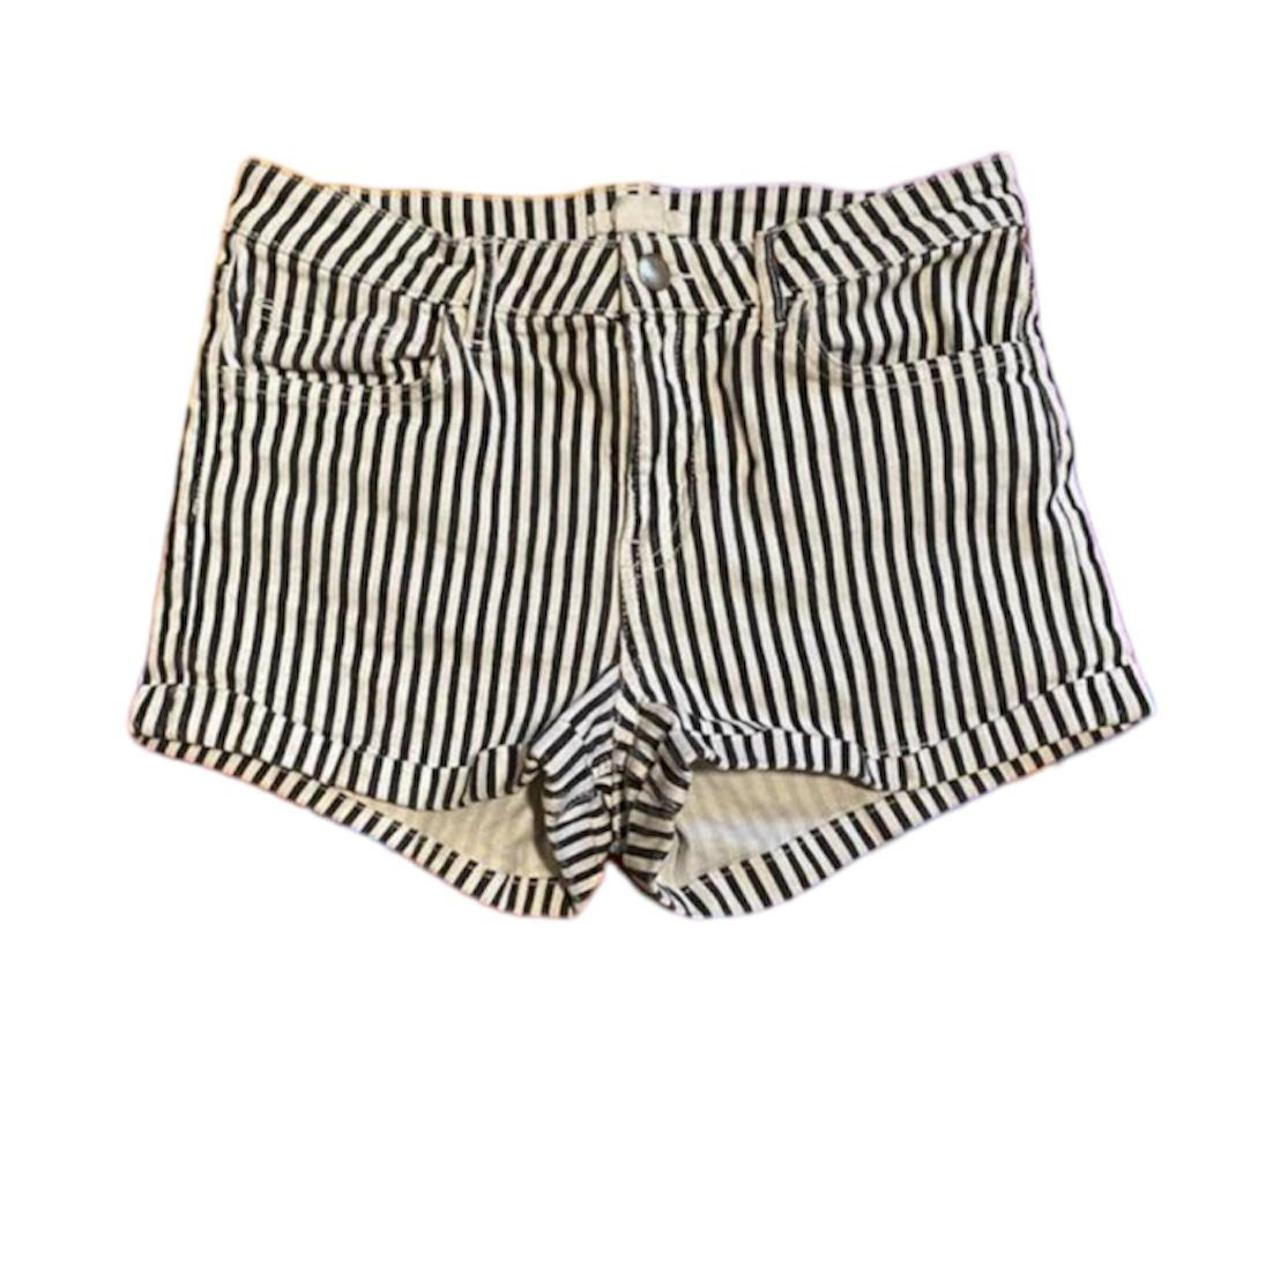 Black And White Striped Shorts Waist 29 In Not Depop